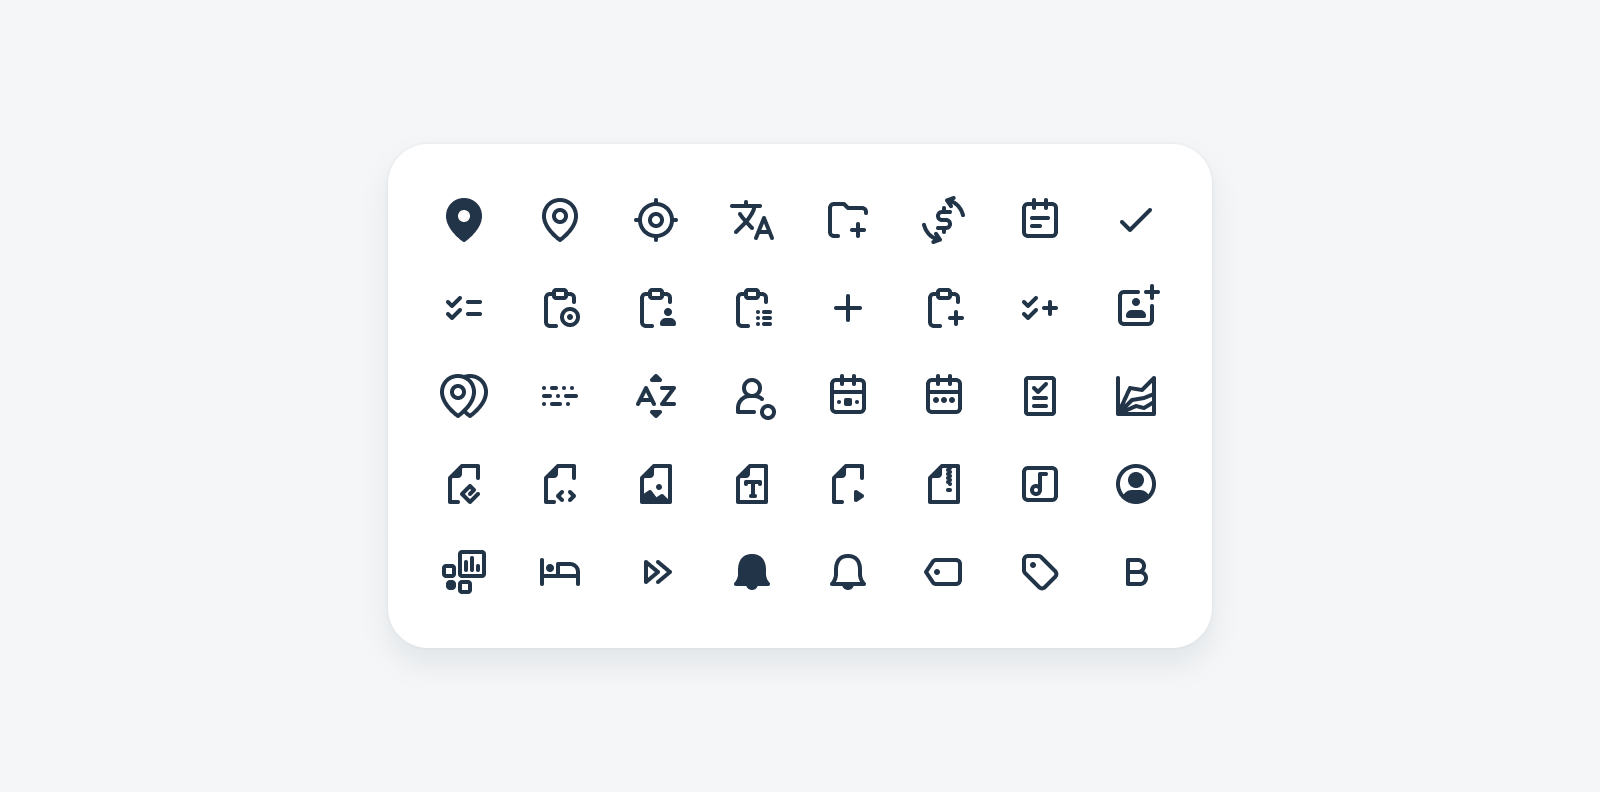 Sample icons from new icon set